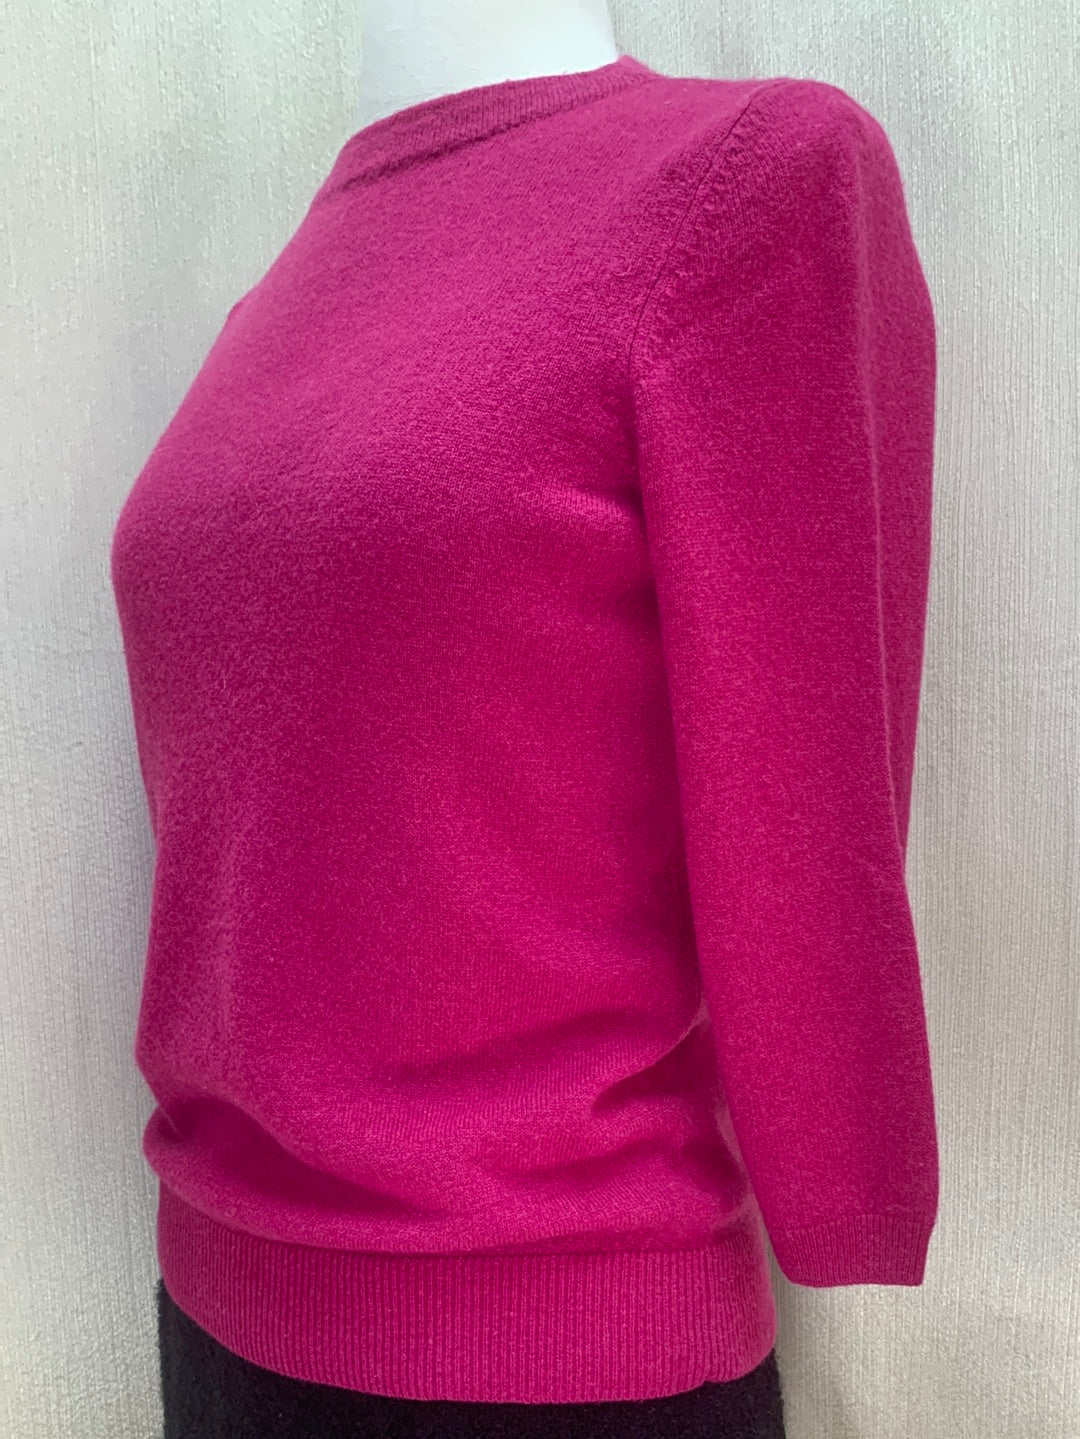 TALBOTS berry pink Cashmere 3/4 Sleeve Sweater - SP